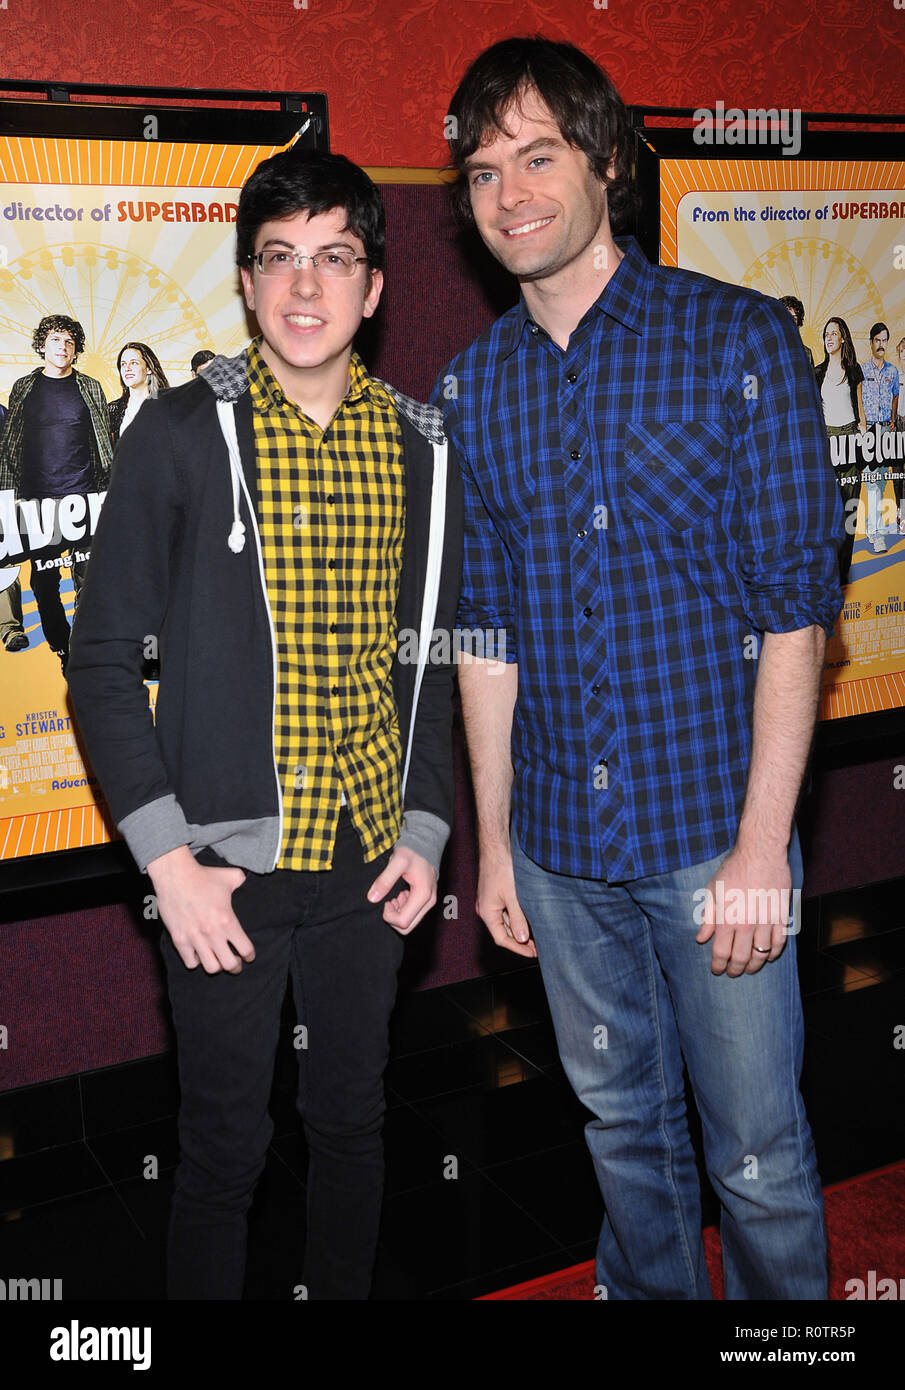 Bill Hader and Christopher Mintz-Plasse - Adventureland Premiere at the Chinese 6 Theatre In Los Angeles.          -            Mintz-PlasseChristophe Stock Photo